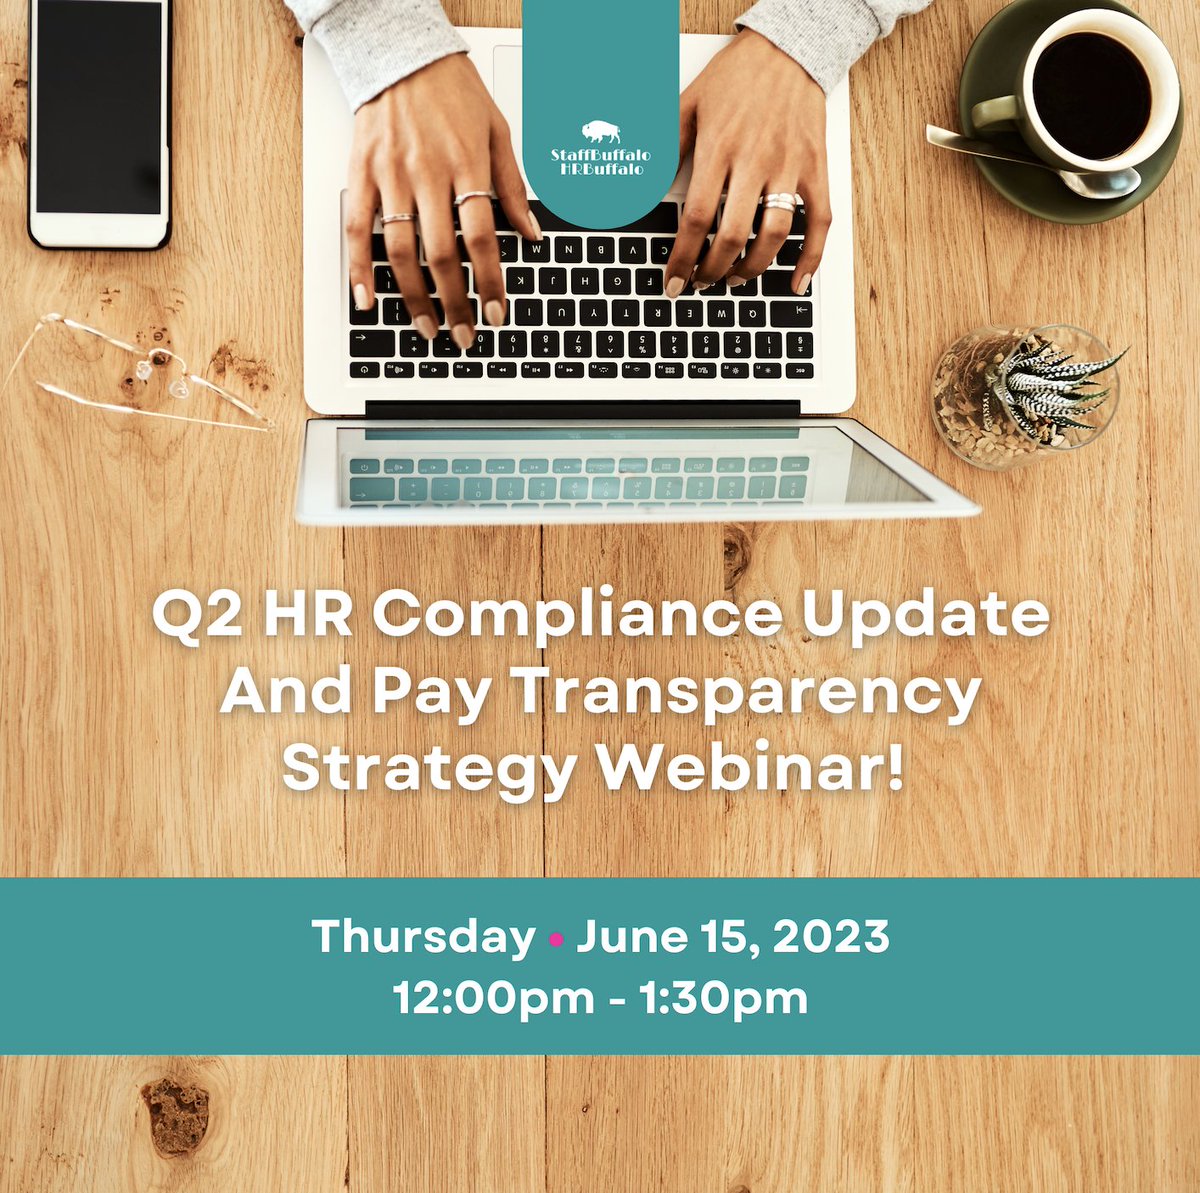 🔎 Want to ensure your organization complies with the latest regulations and is up to speed on pay transparency? Don't miss out! Register today and take the necessary steps to stay ahead!

#hrwebinar #salarytransparency #hrcompliance #hrservices @staffbuffalo @hrbuffalo